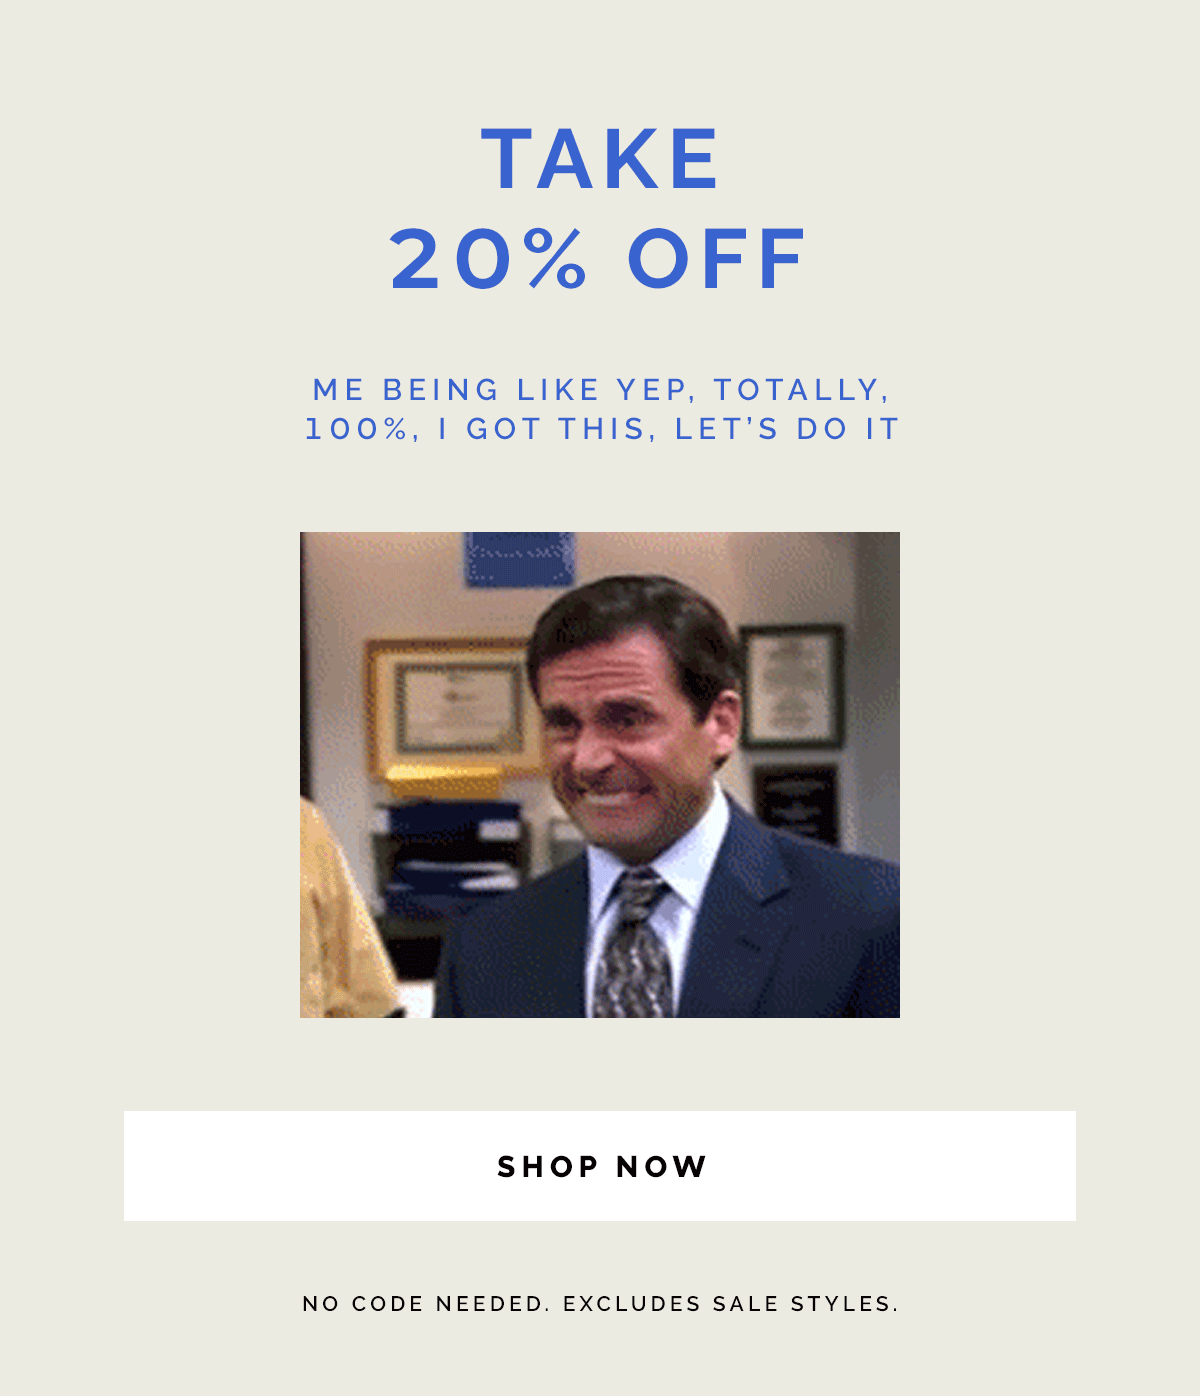 Take 20% OFF NOW!